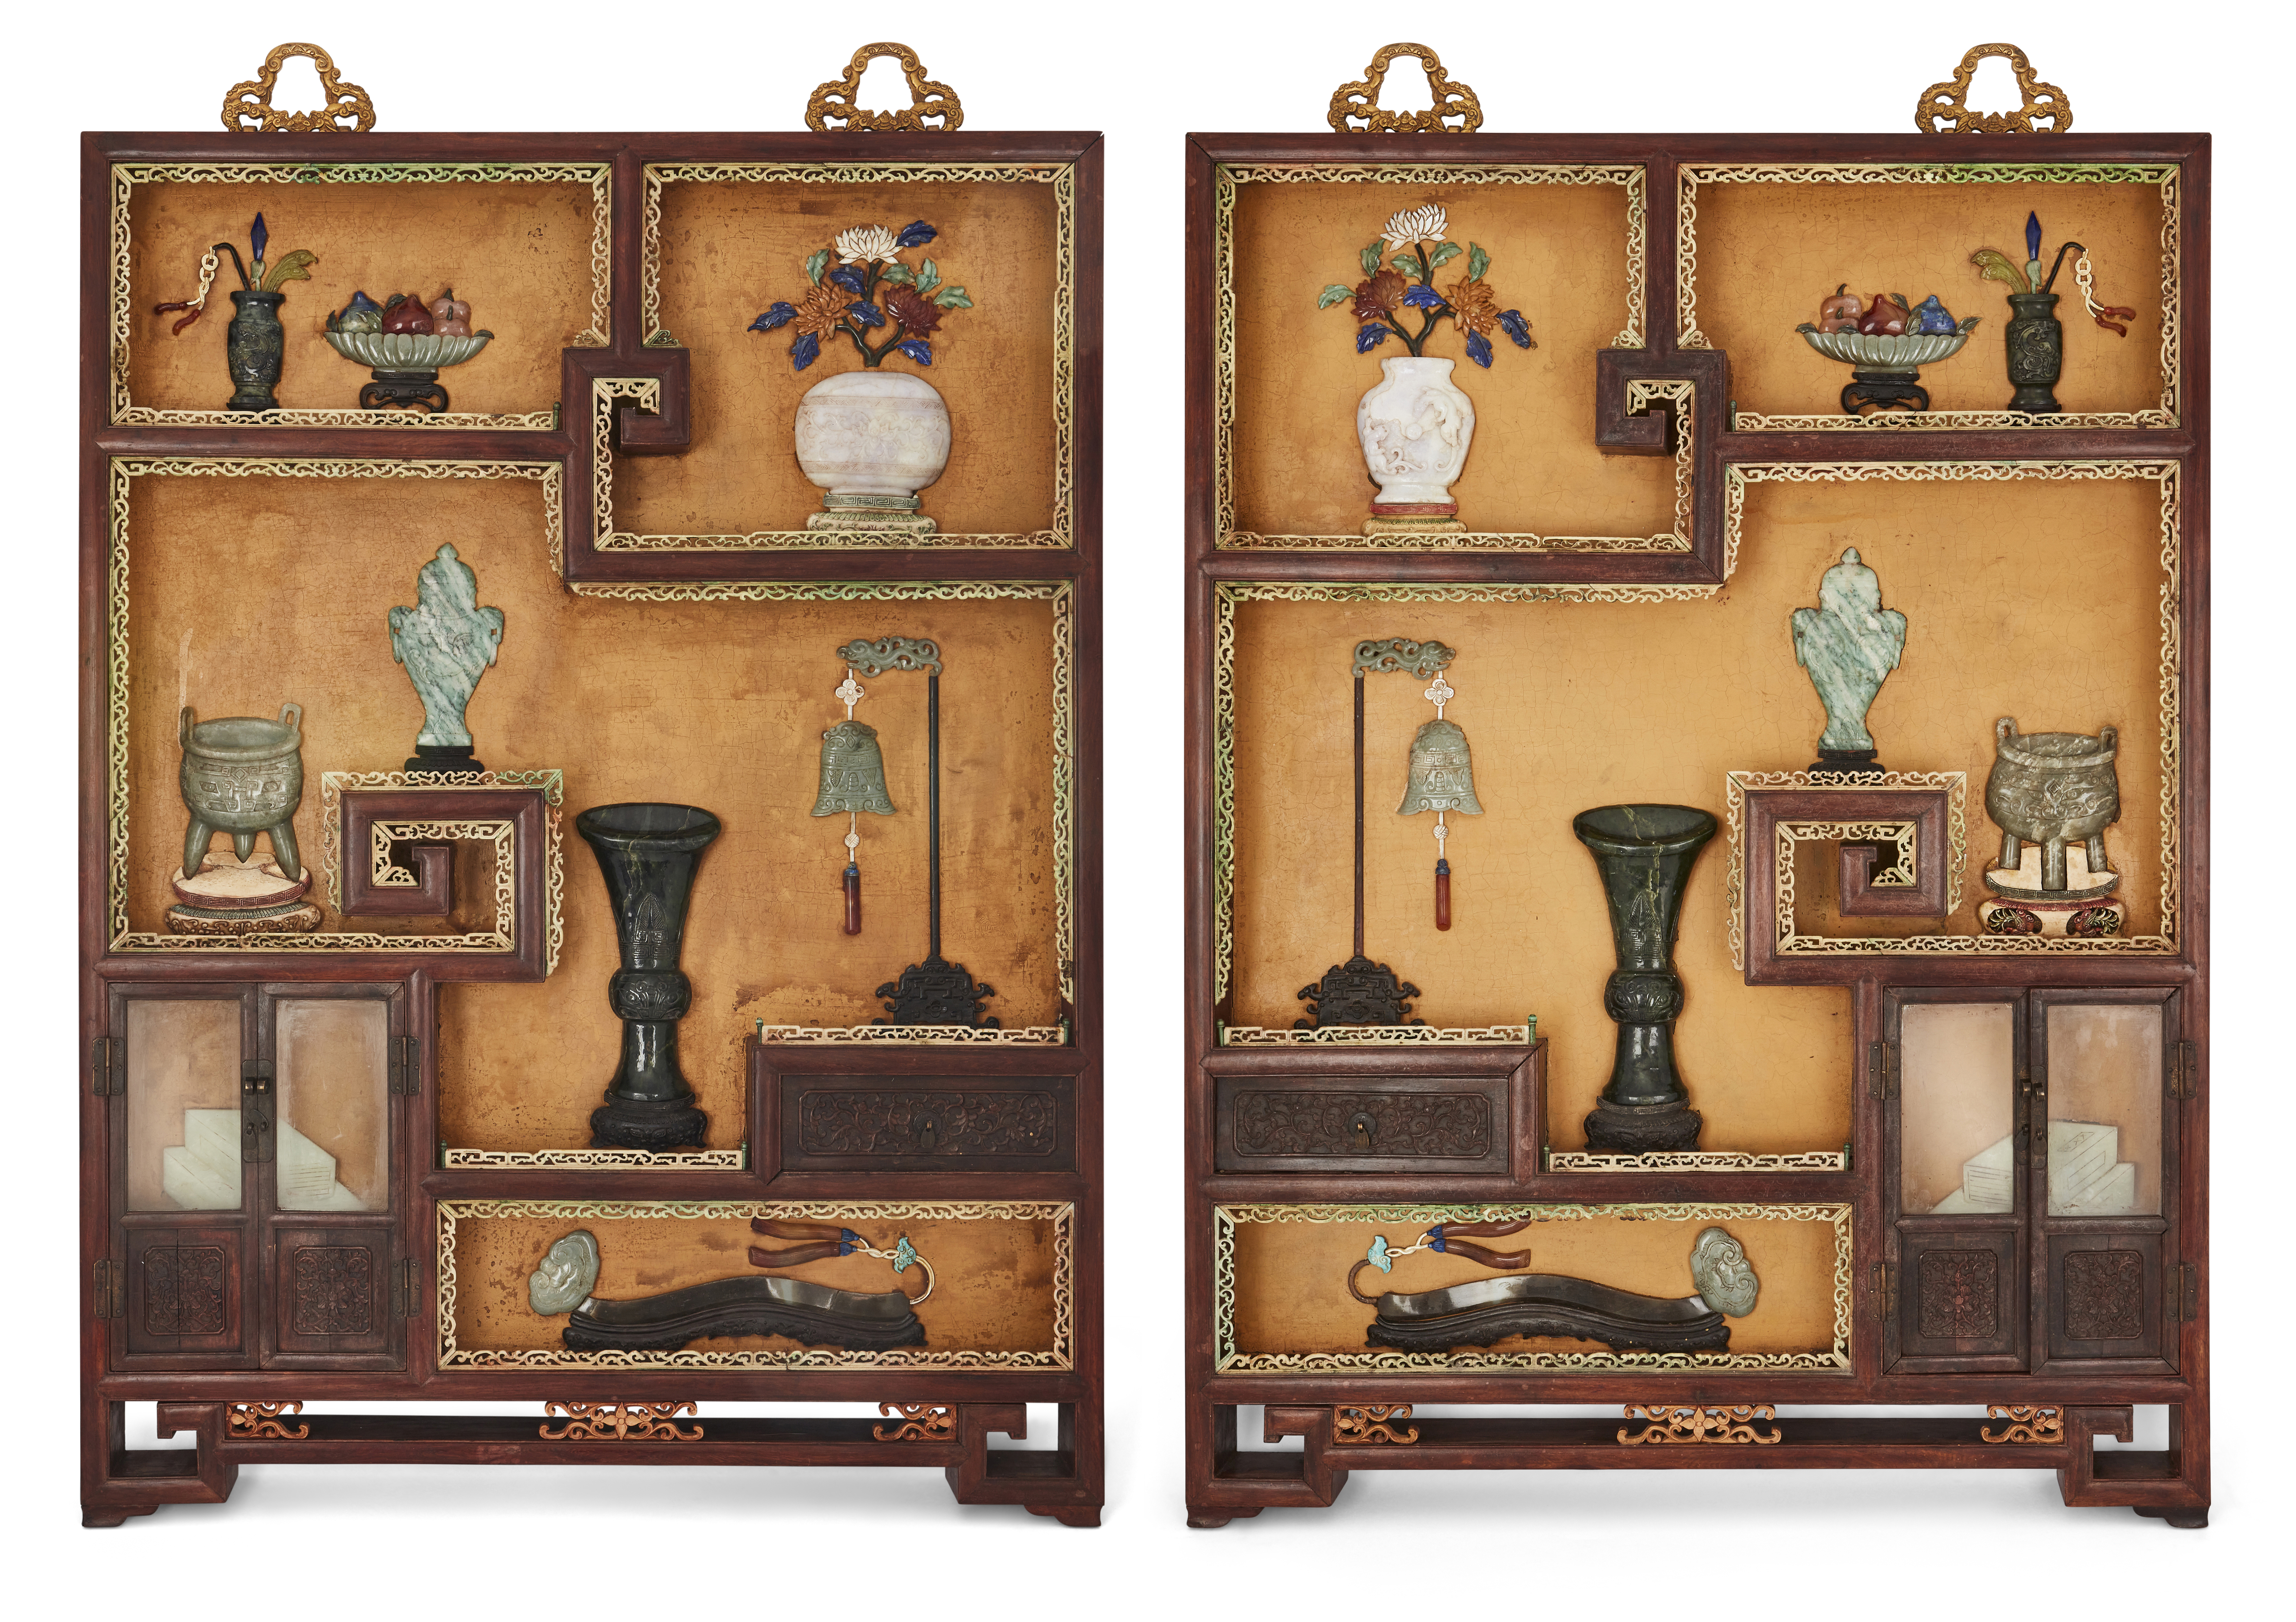 An impressive pair of Chinese lacquer and hardstone inlaid trompe-l'œil panels, Late Qing dynasty